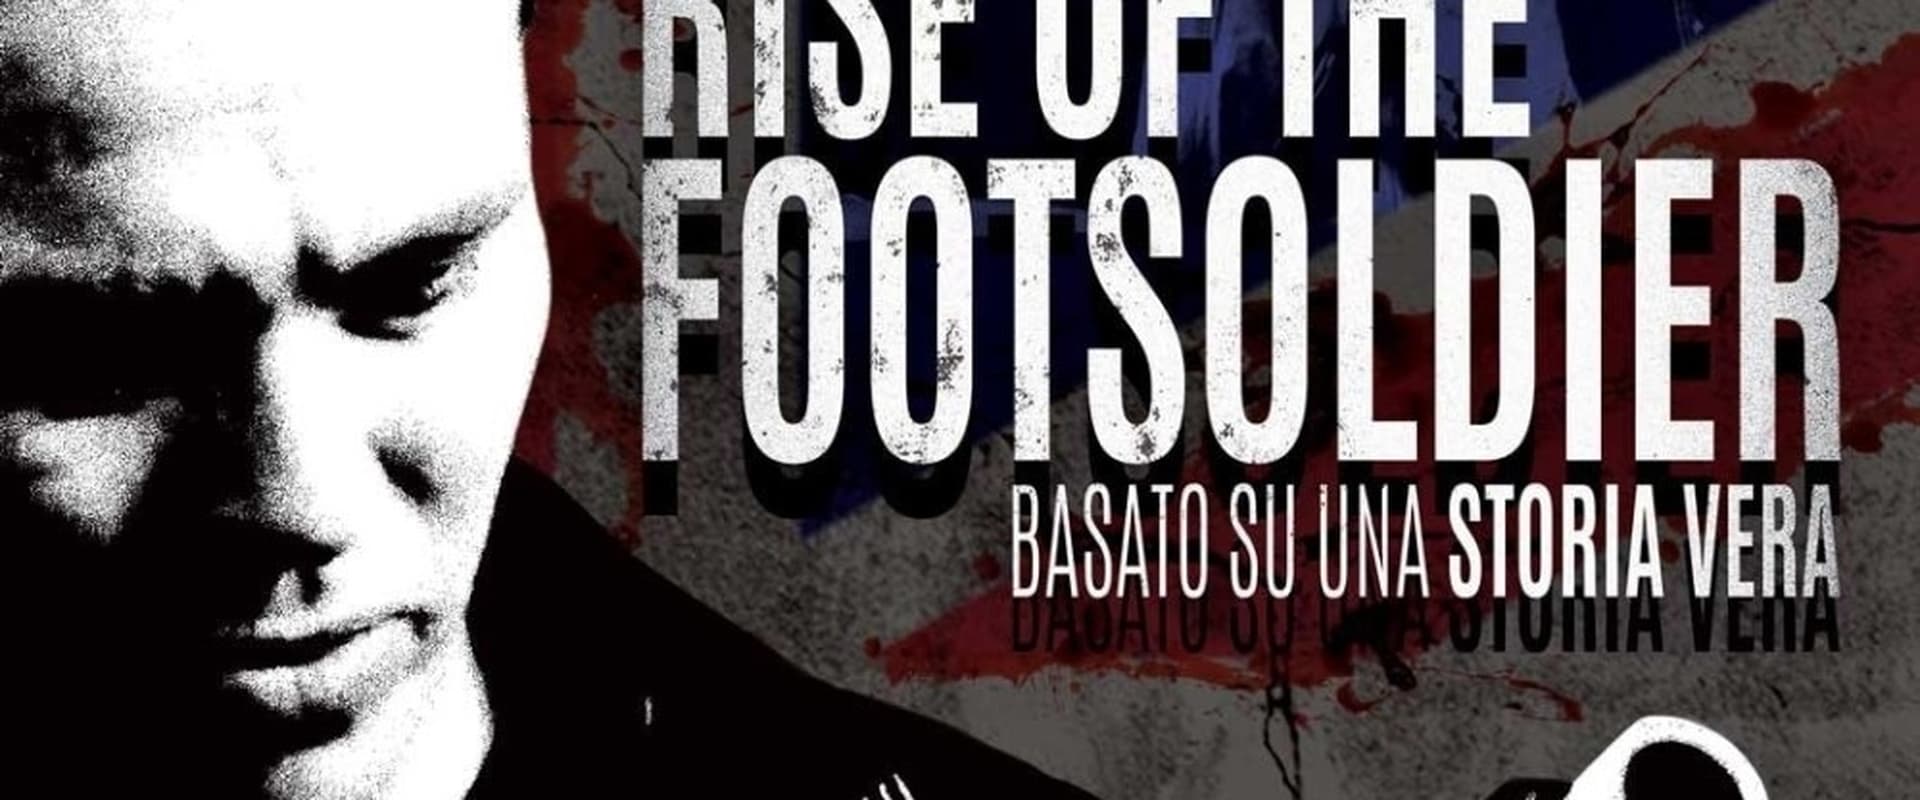 Rise Of The Footsoldier